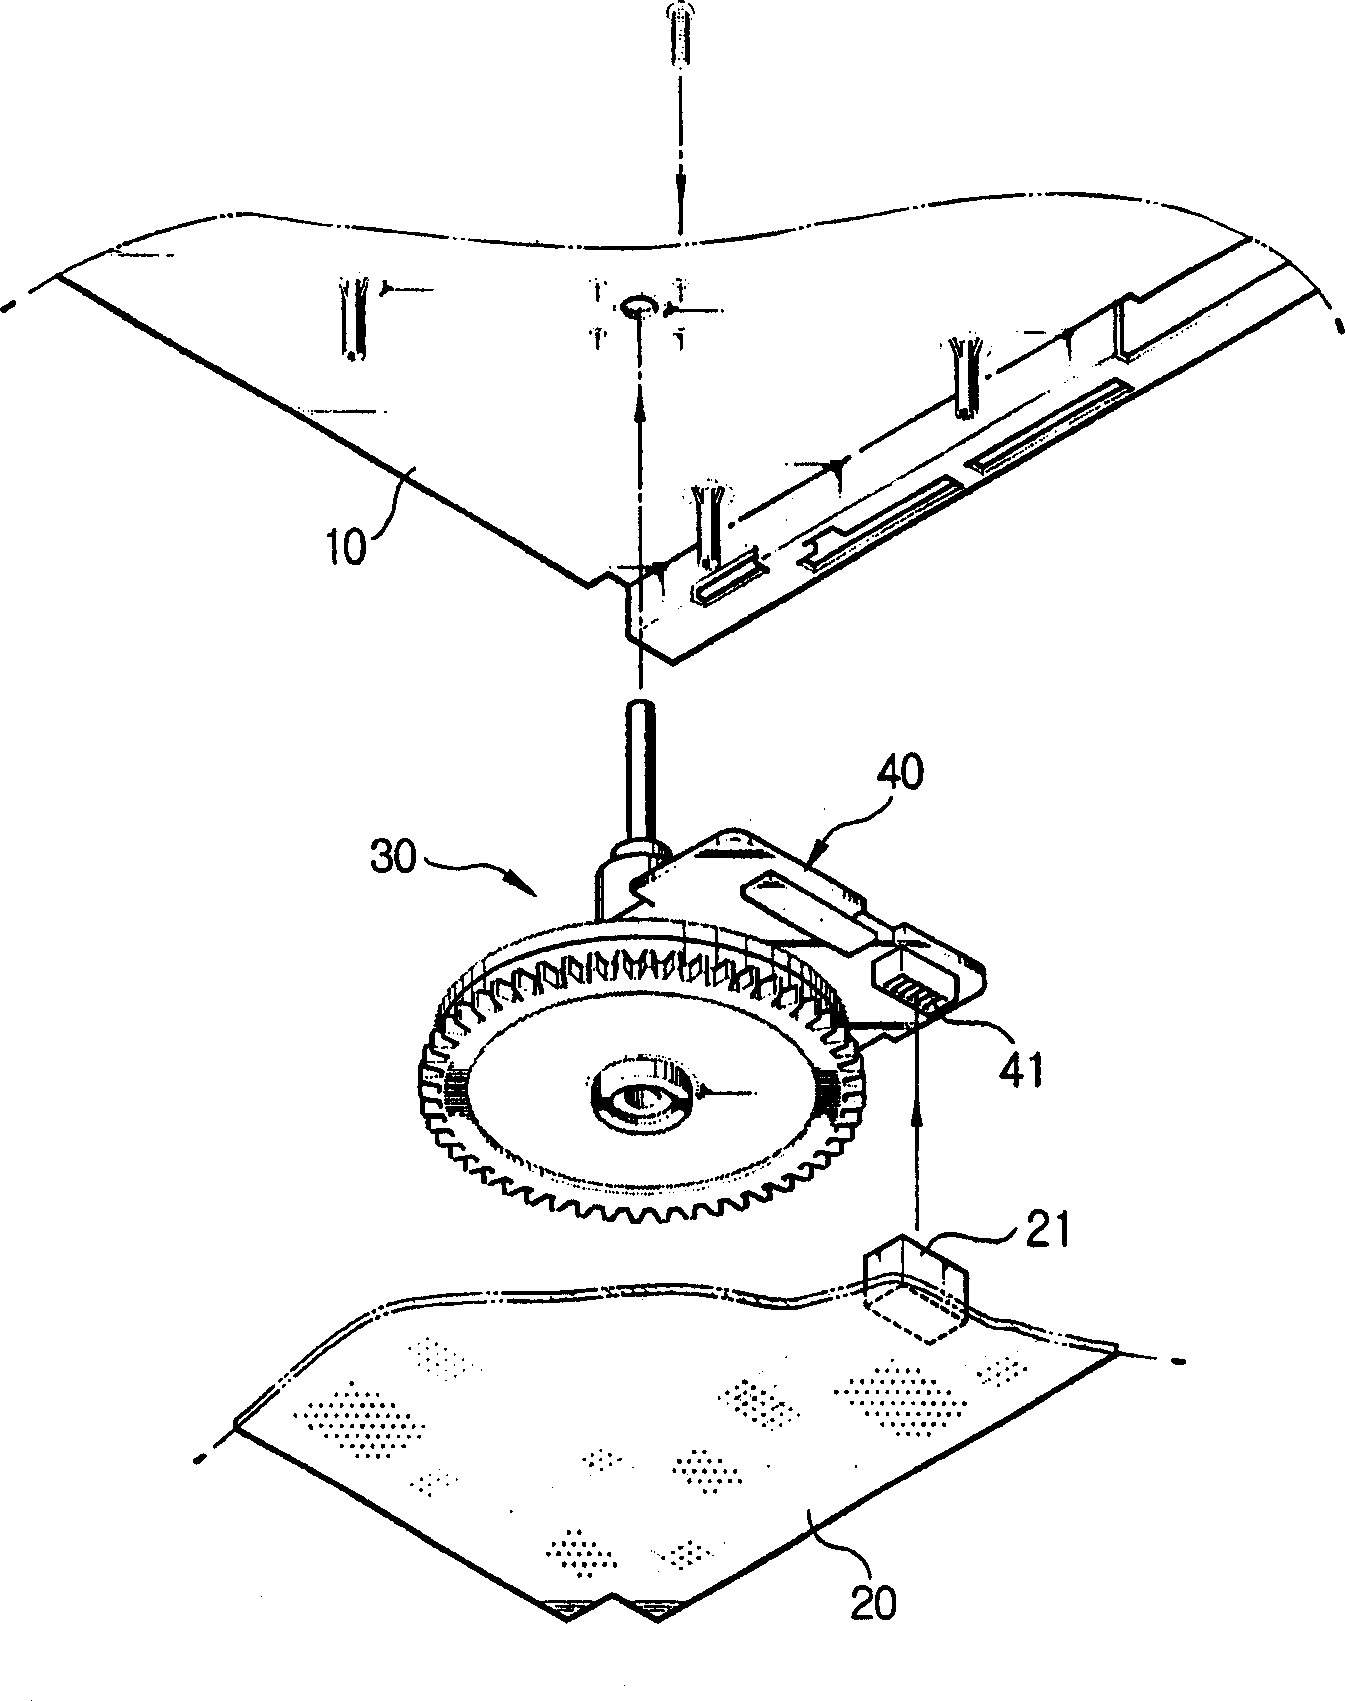 Connecting mechanism of tape drive wheel electric machine for tape recorder